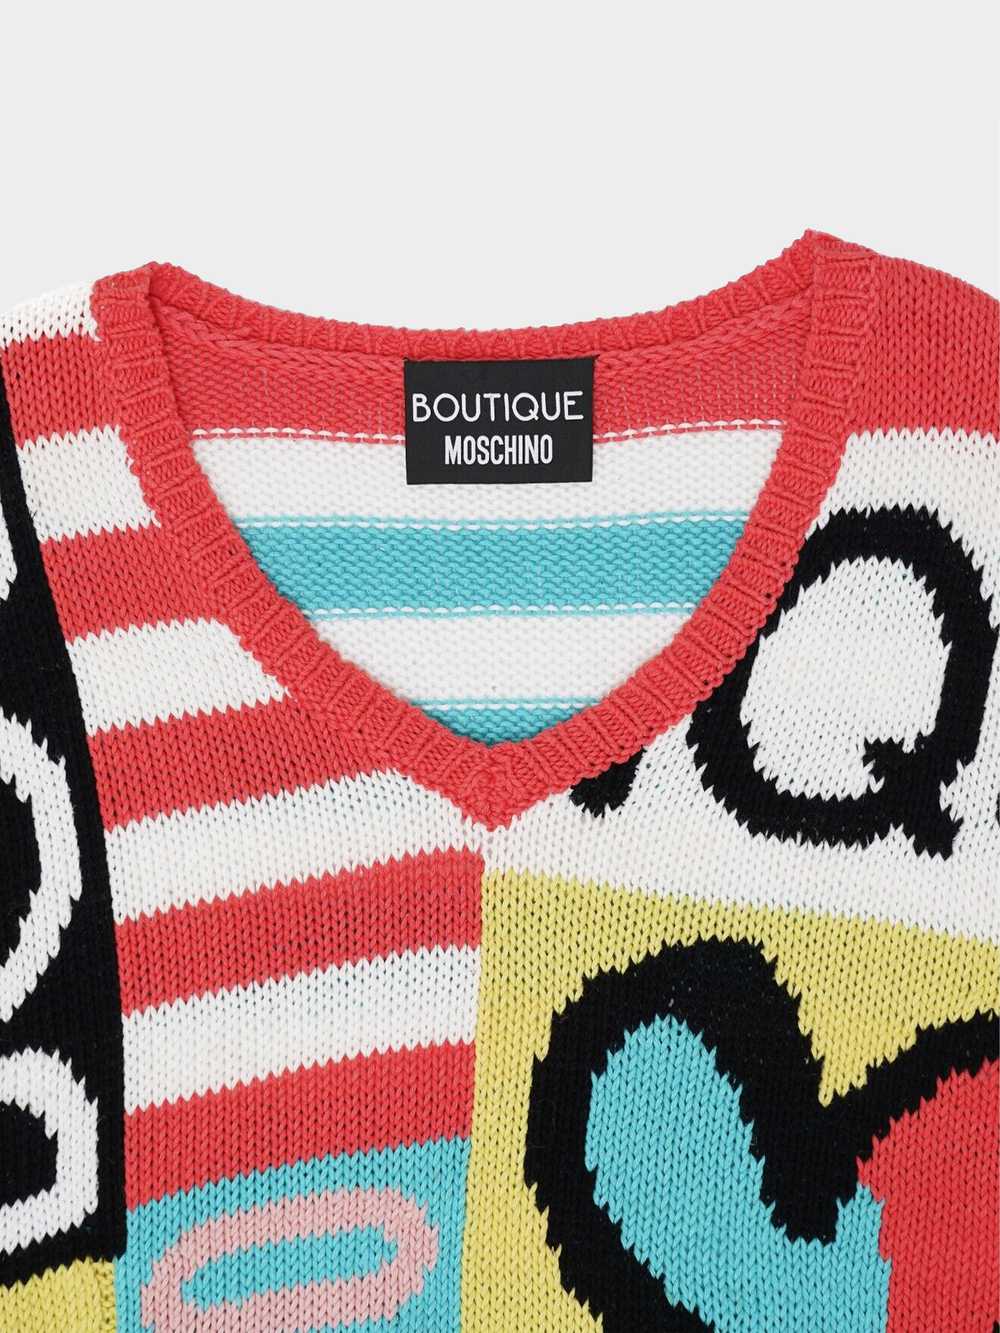 Moschino Boutique 2010s Colorblock Sweater Jumper… - image 3